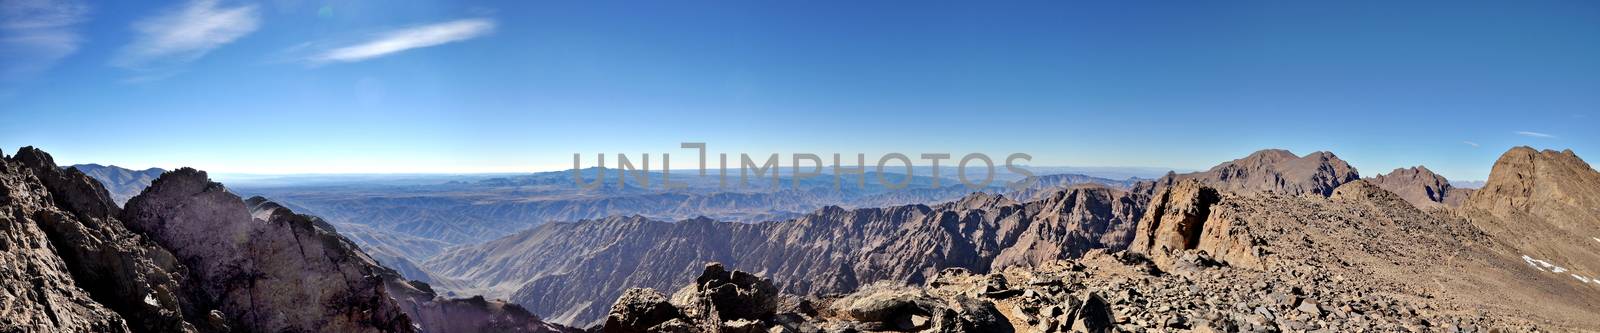 Panoramic view from Mount Toubkal (4,167 metres), Morocco by anderm